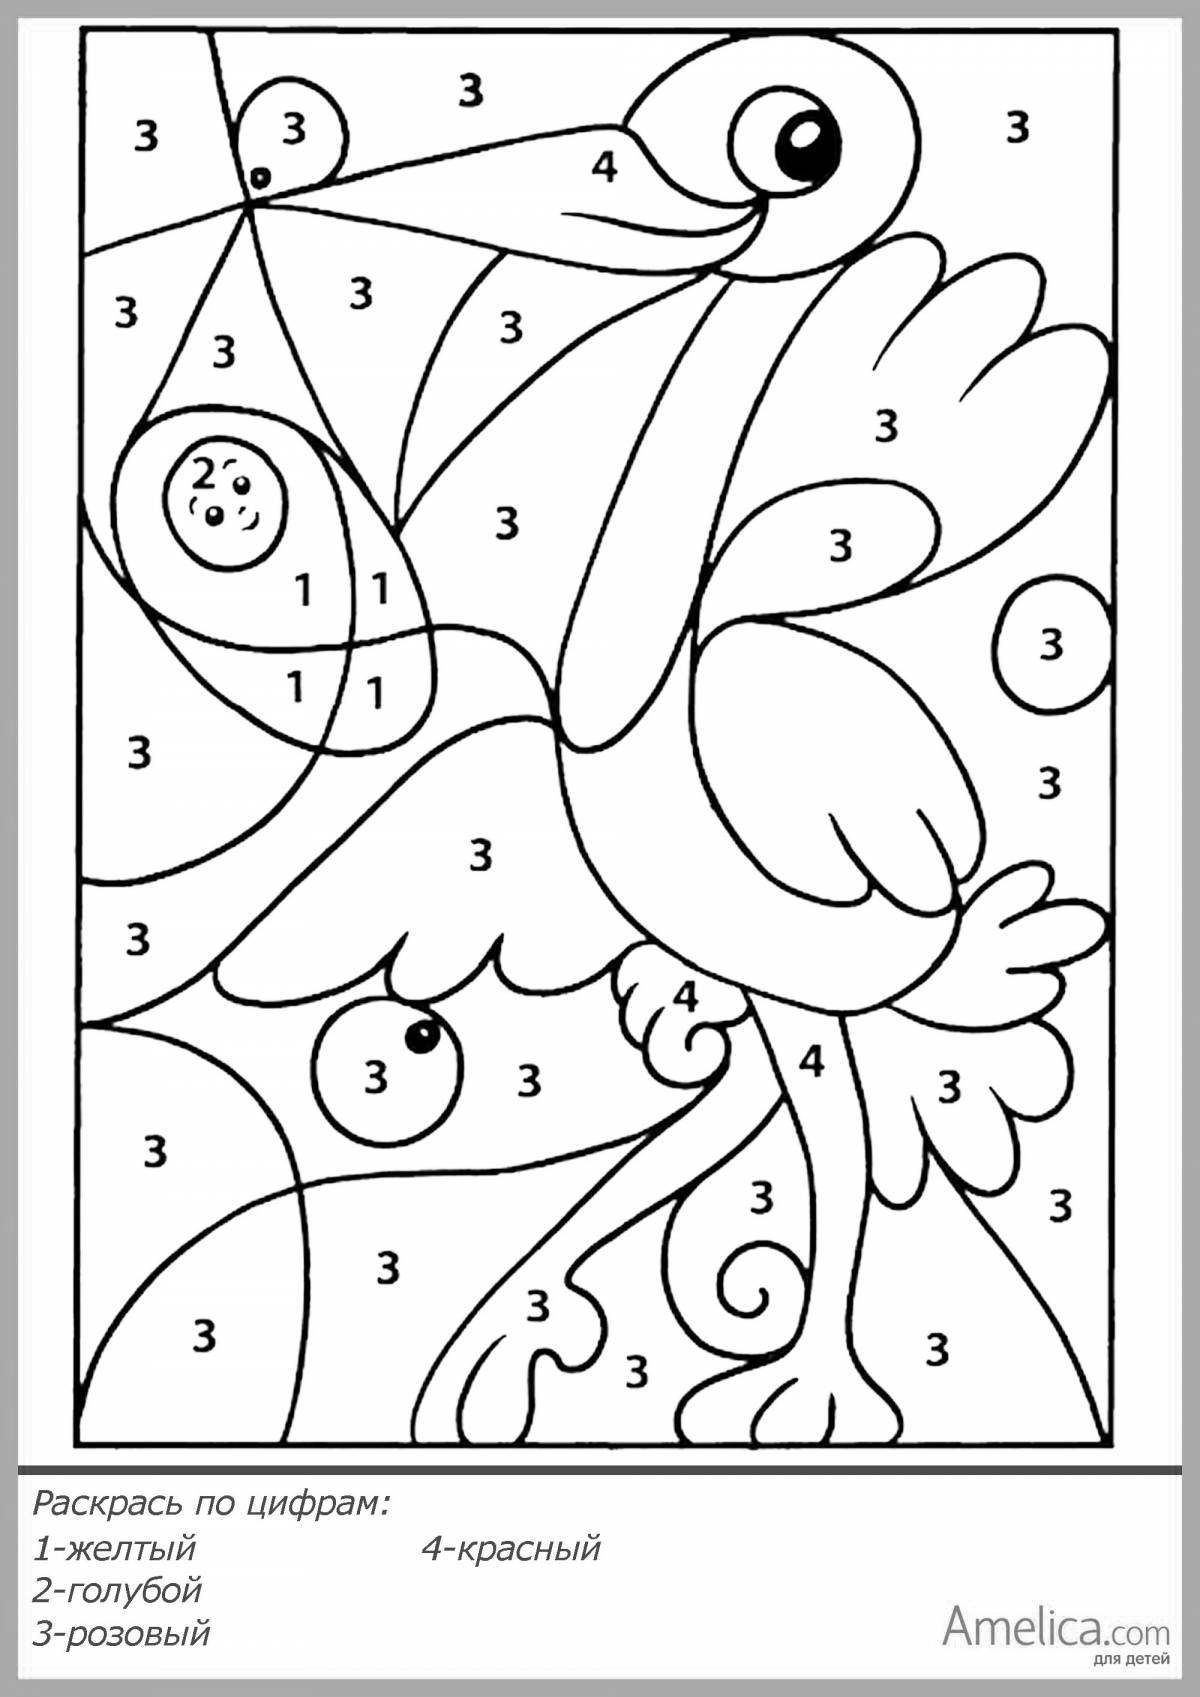 6 years by numbers coloring page